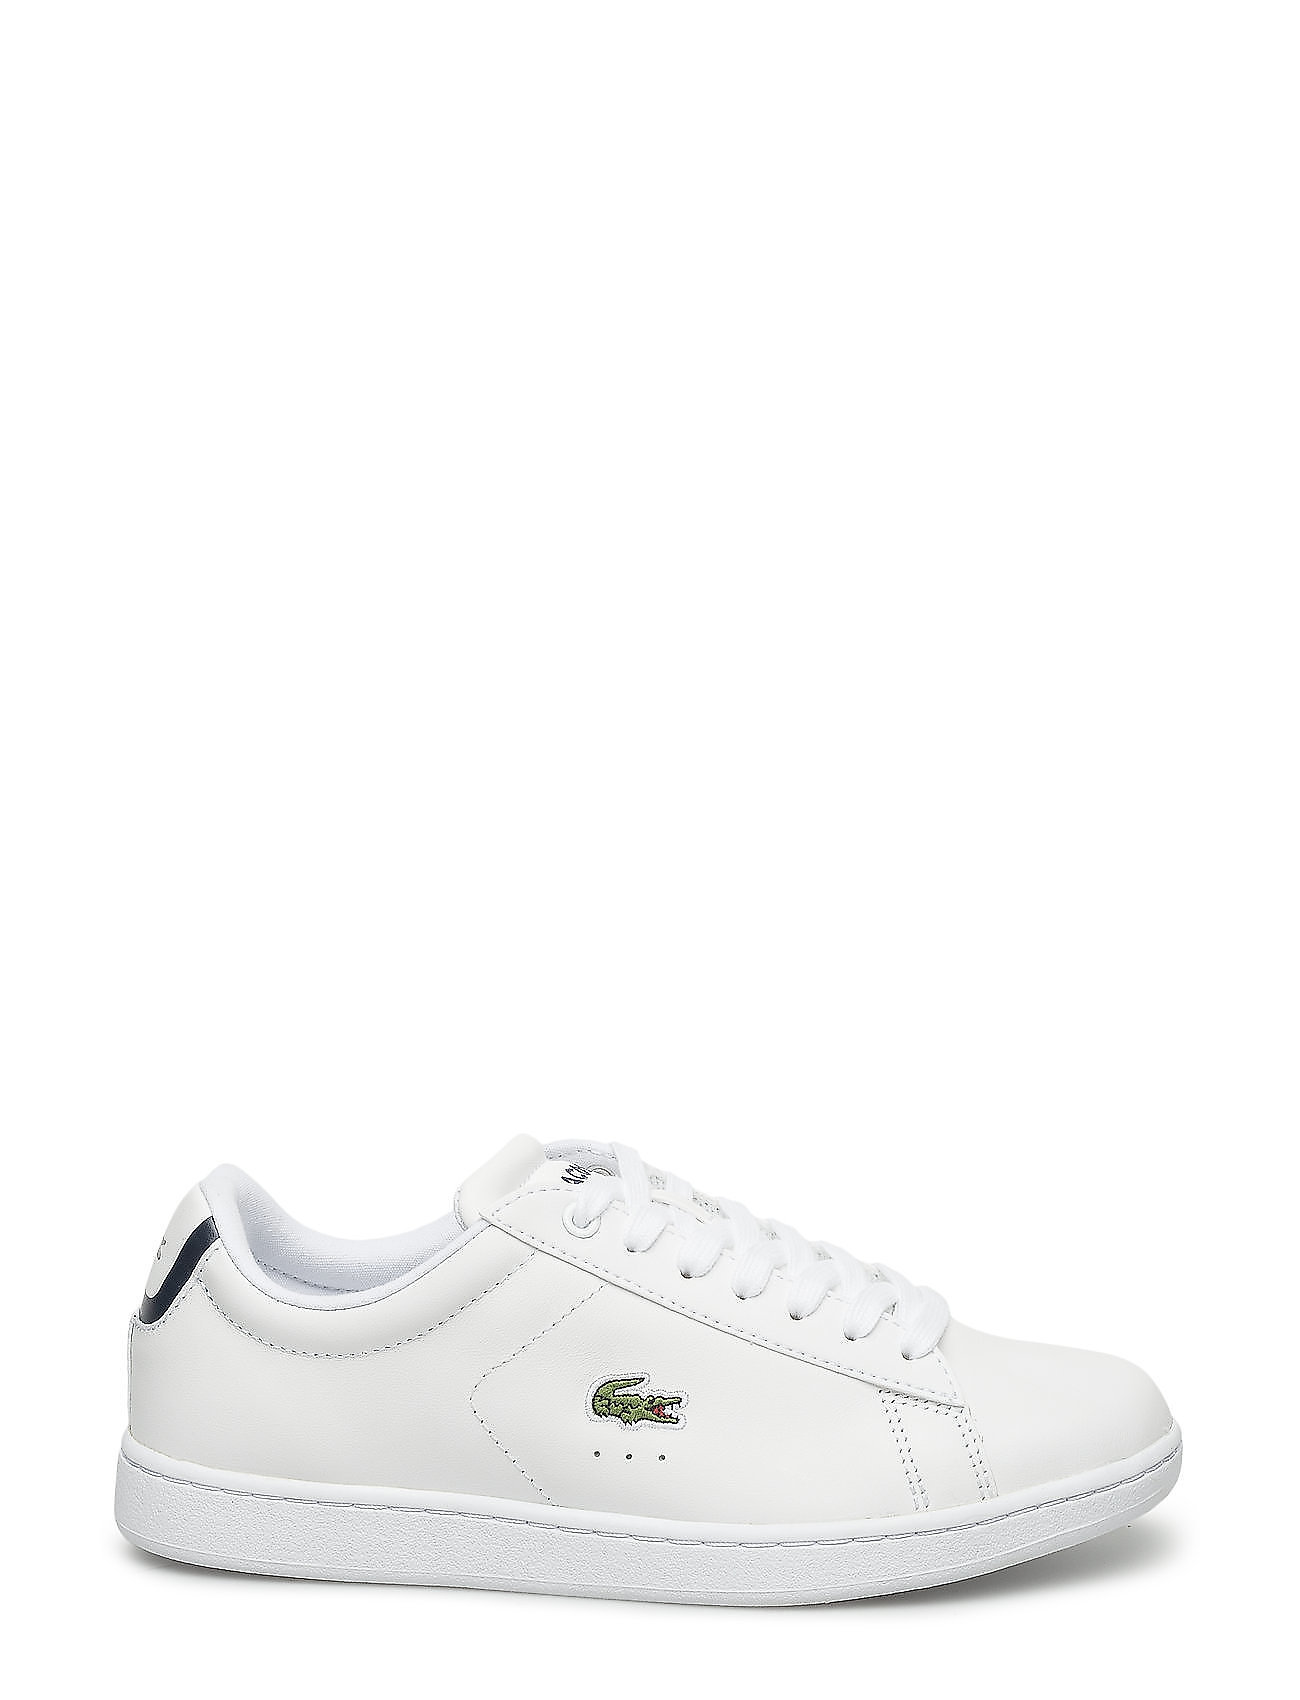 Hvid Lacoste Carnaby Evo Bl 1 Sfa Low-top Sneakers Hvid SHOES sneakers dame - Pashion.dk